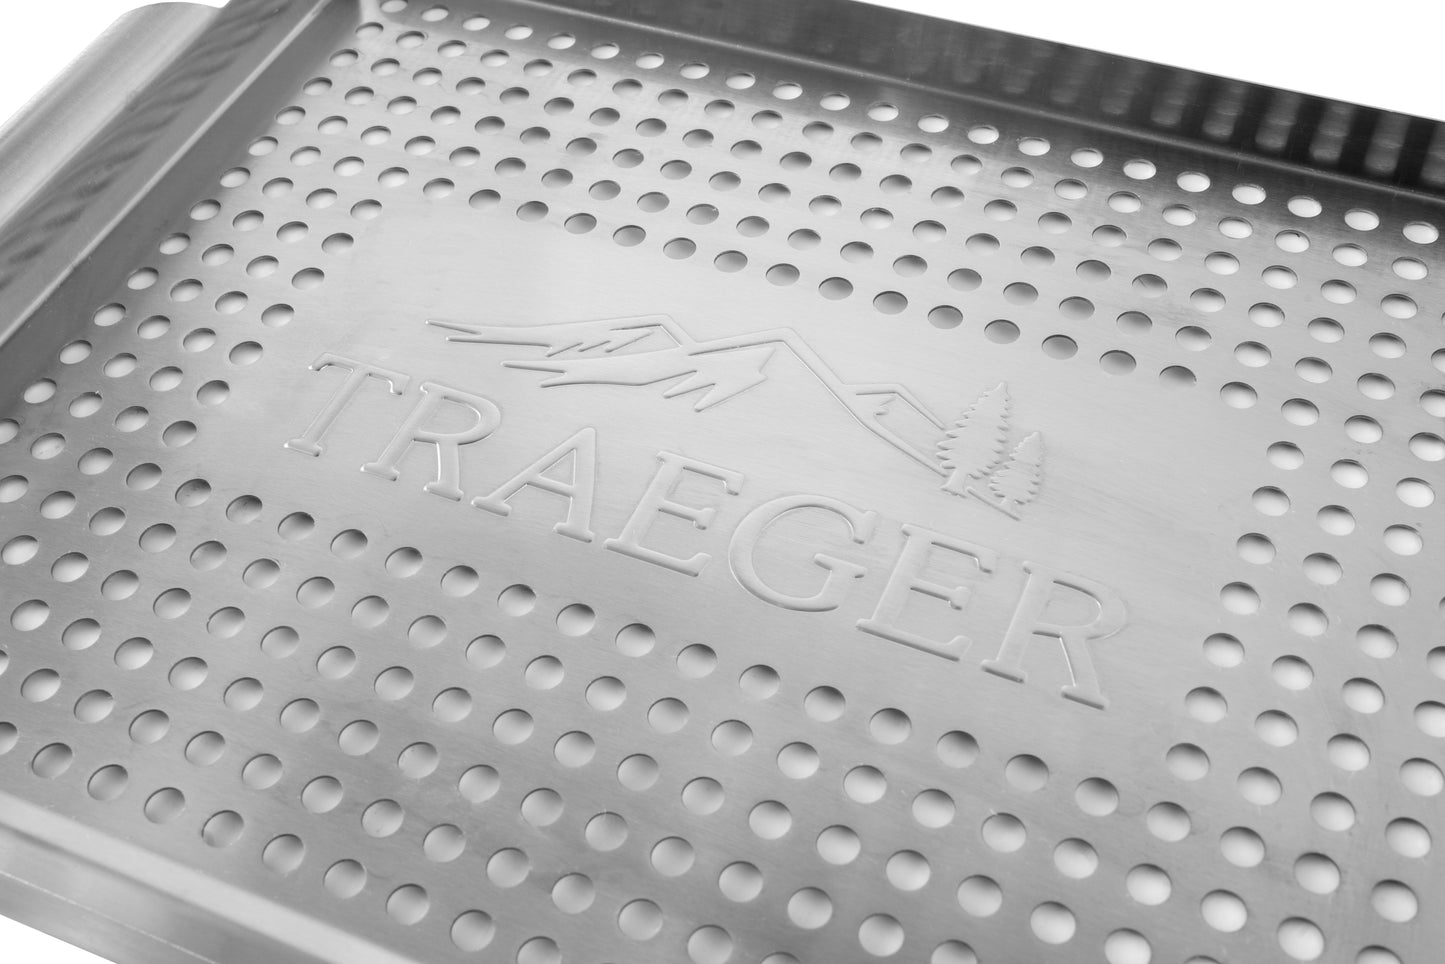 The Traeger logo is featured in the tray's center, giving an upscale look nice enough for gifting.